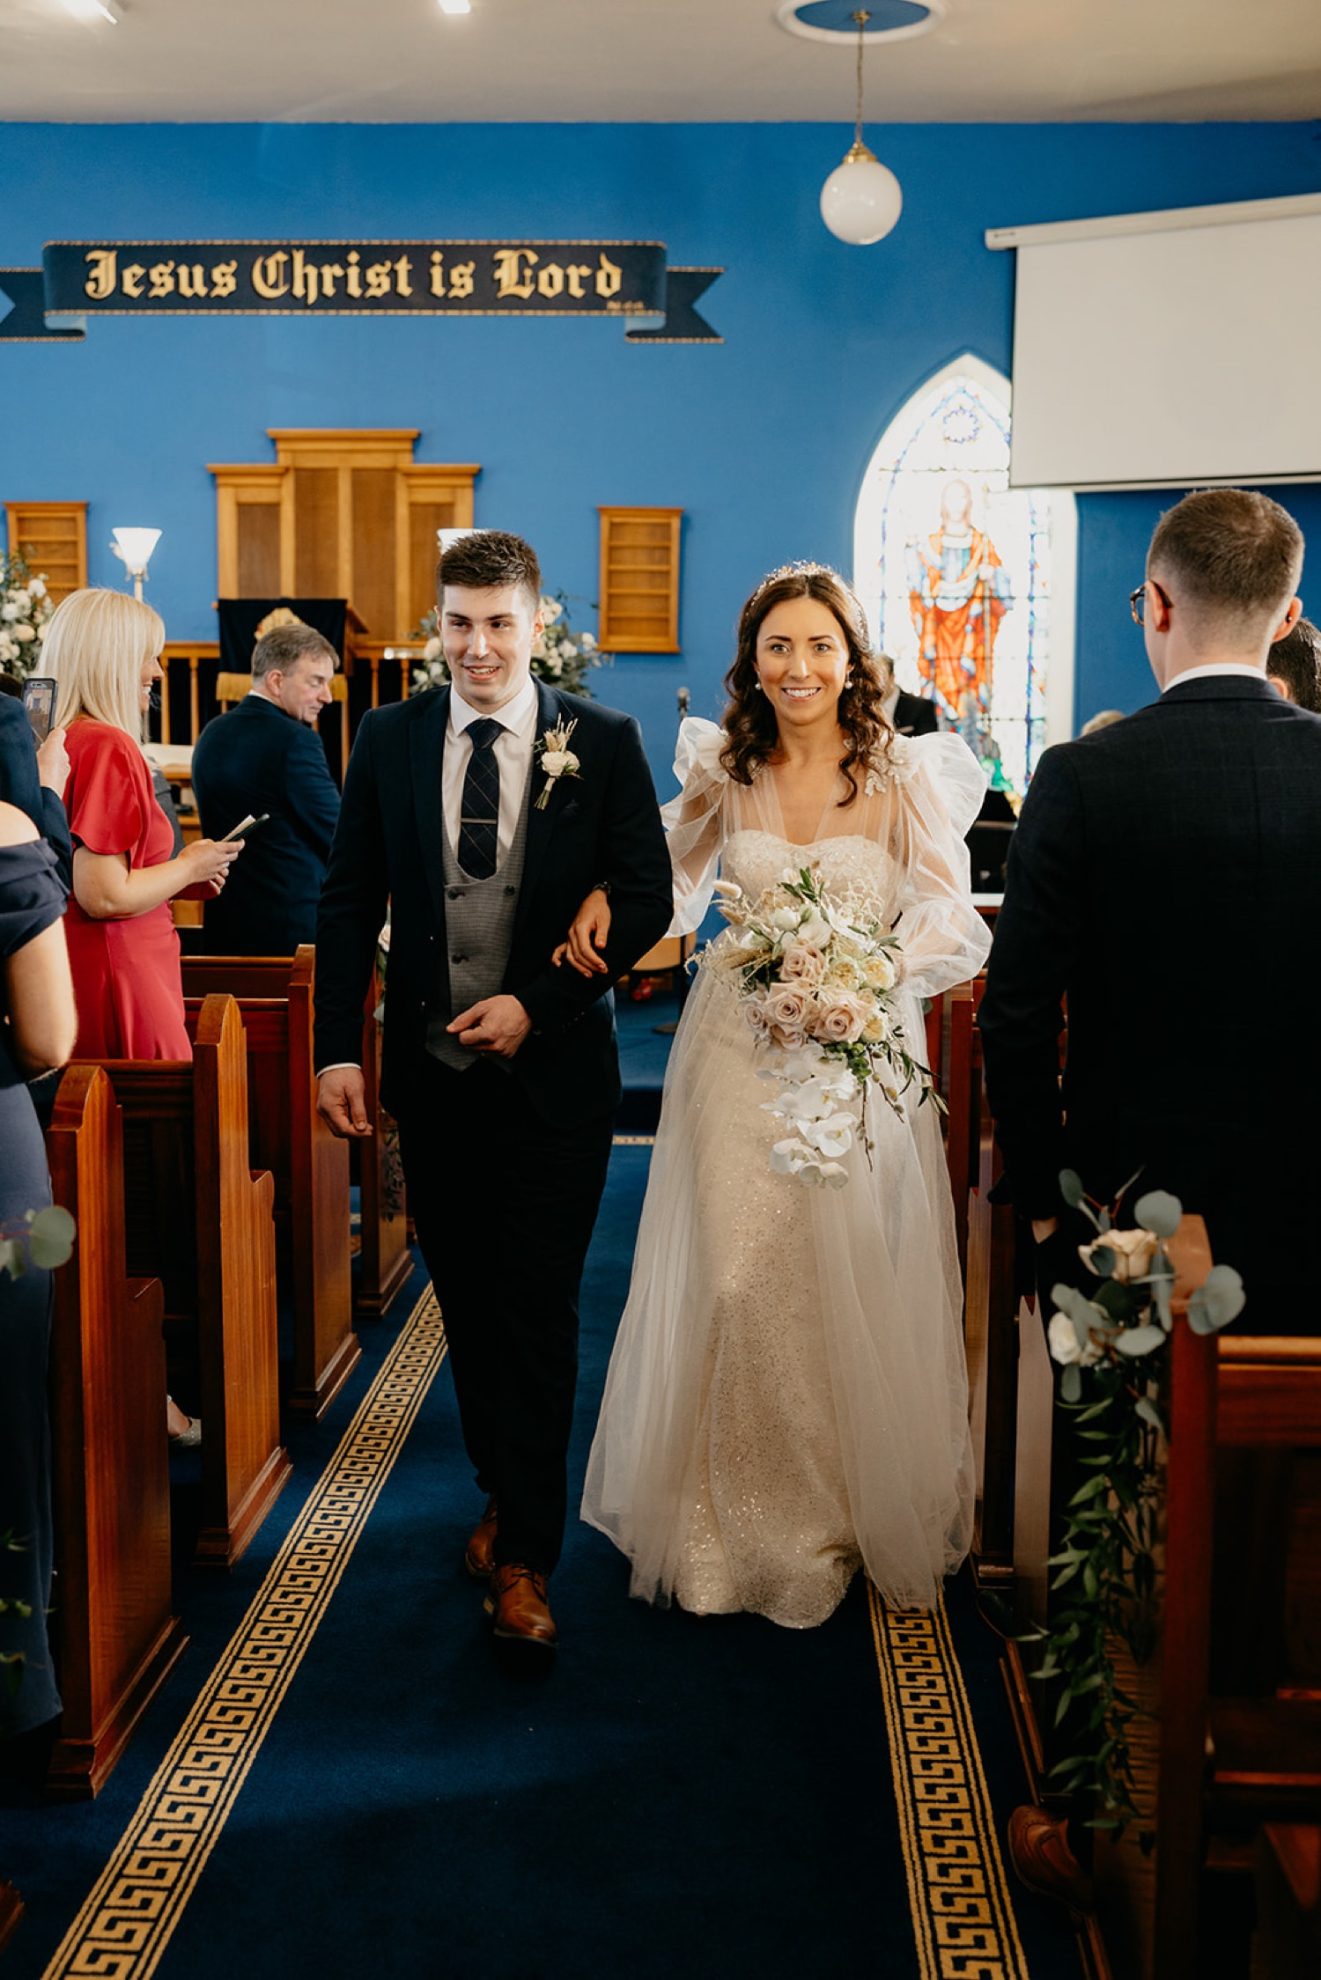 A Memorable Day: Walking down the aisle as a newly married couple